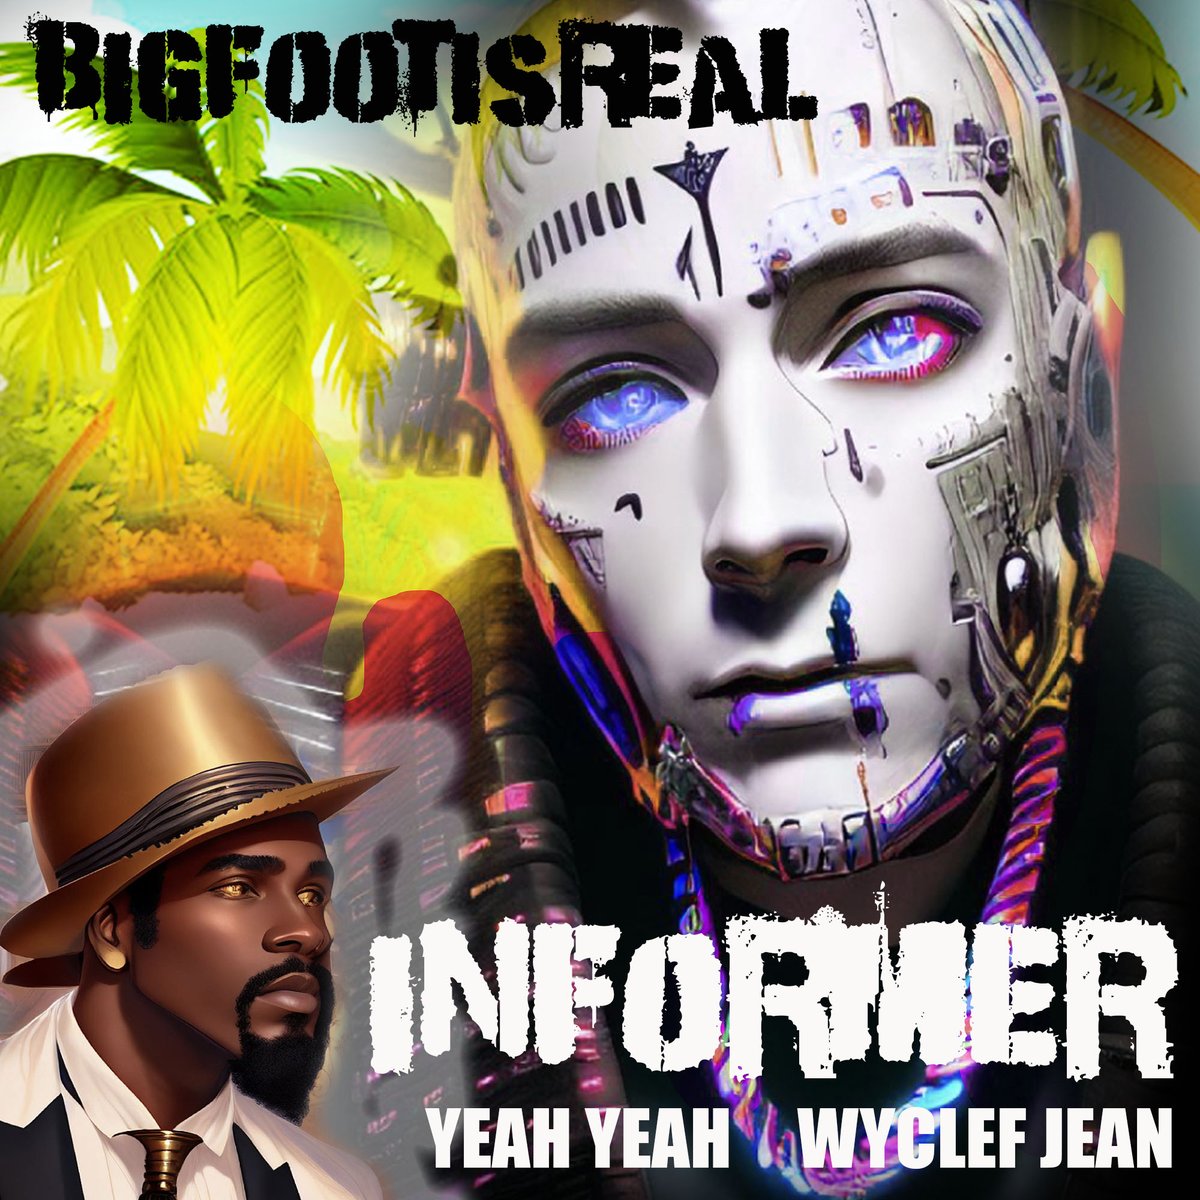 We cracked 94k followers today. So many thx to you all. Also today we are dropping an X World Premiere of our smash Hit #Informer Video with @Wyclef BigFootIsReal It's not a Dream.. @Interscope @yeahyeahbfir